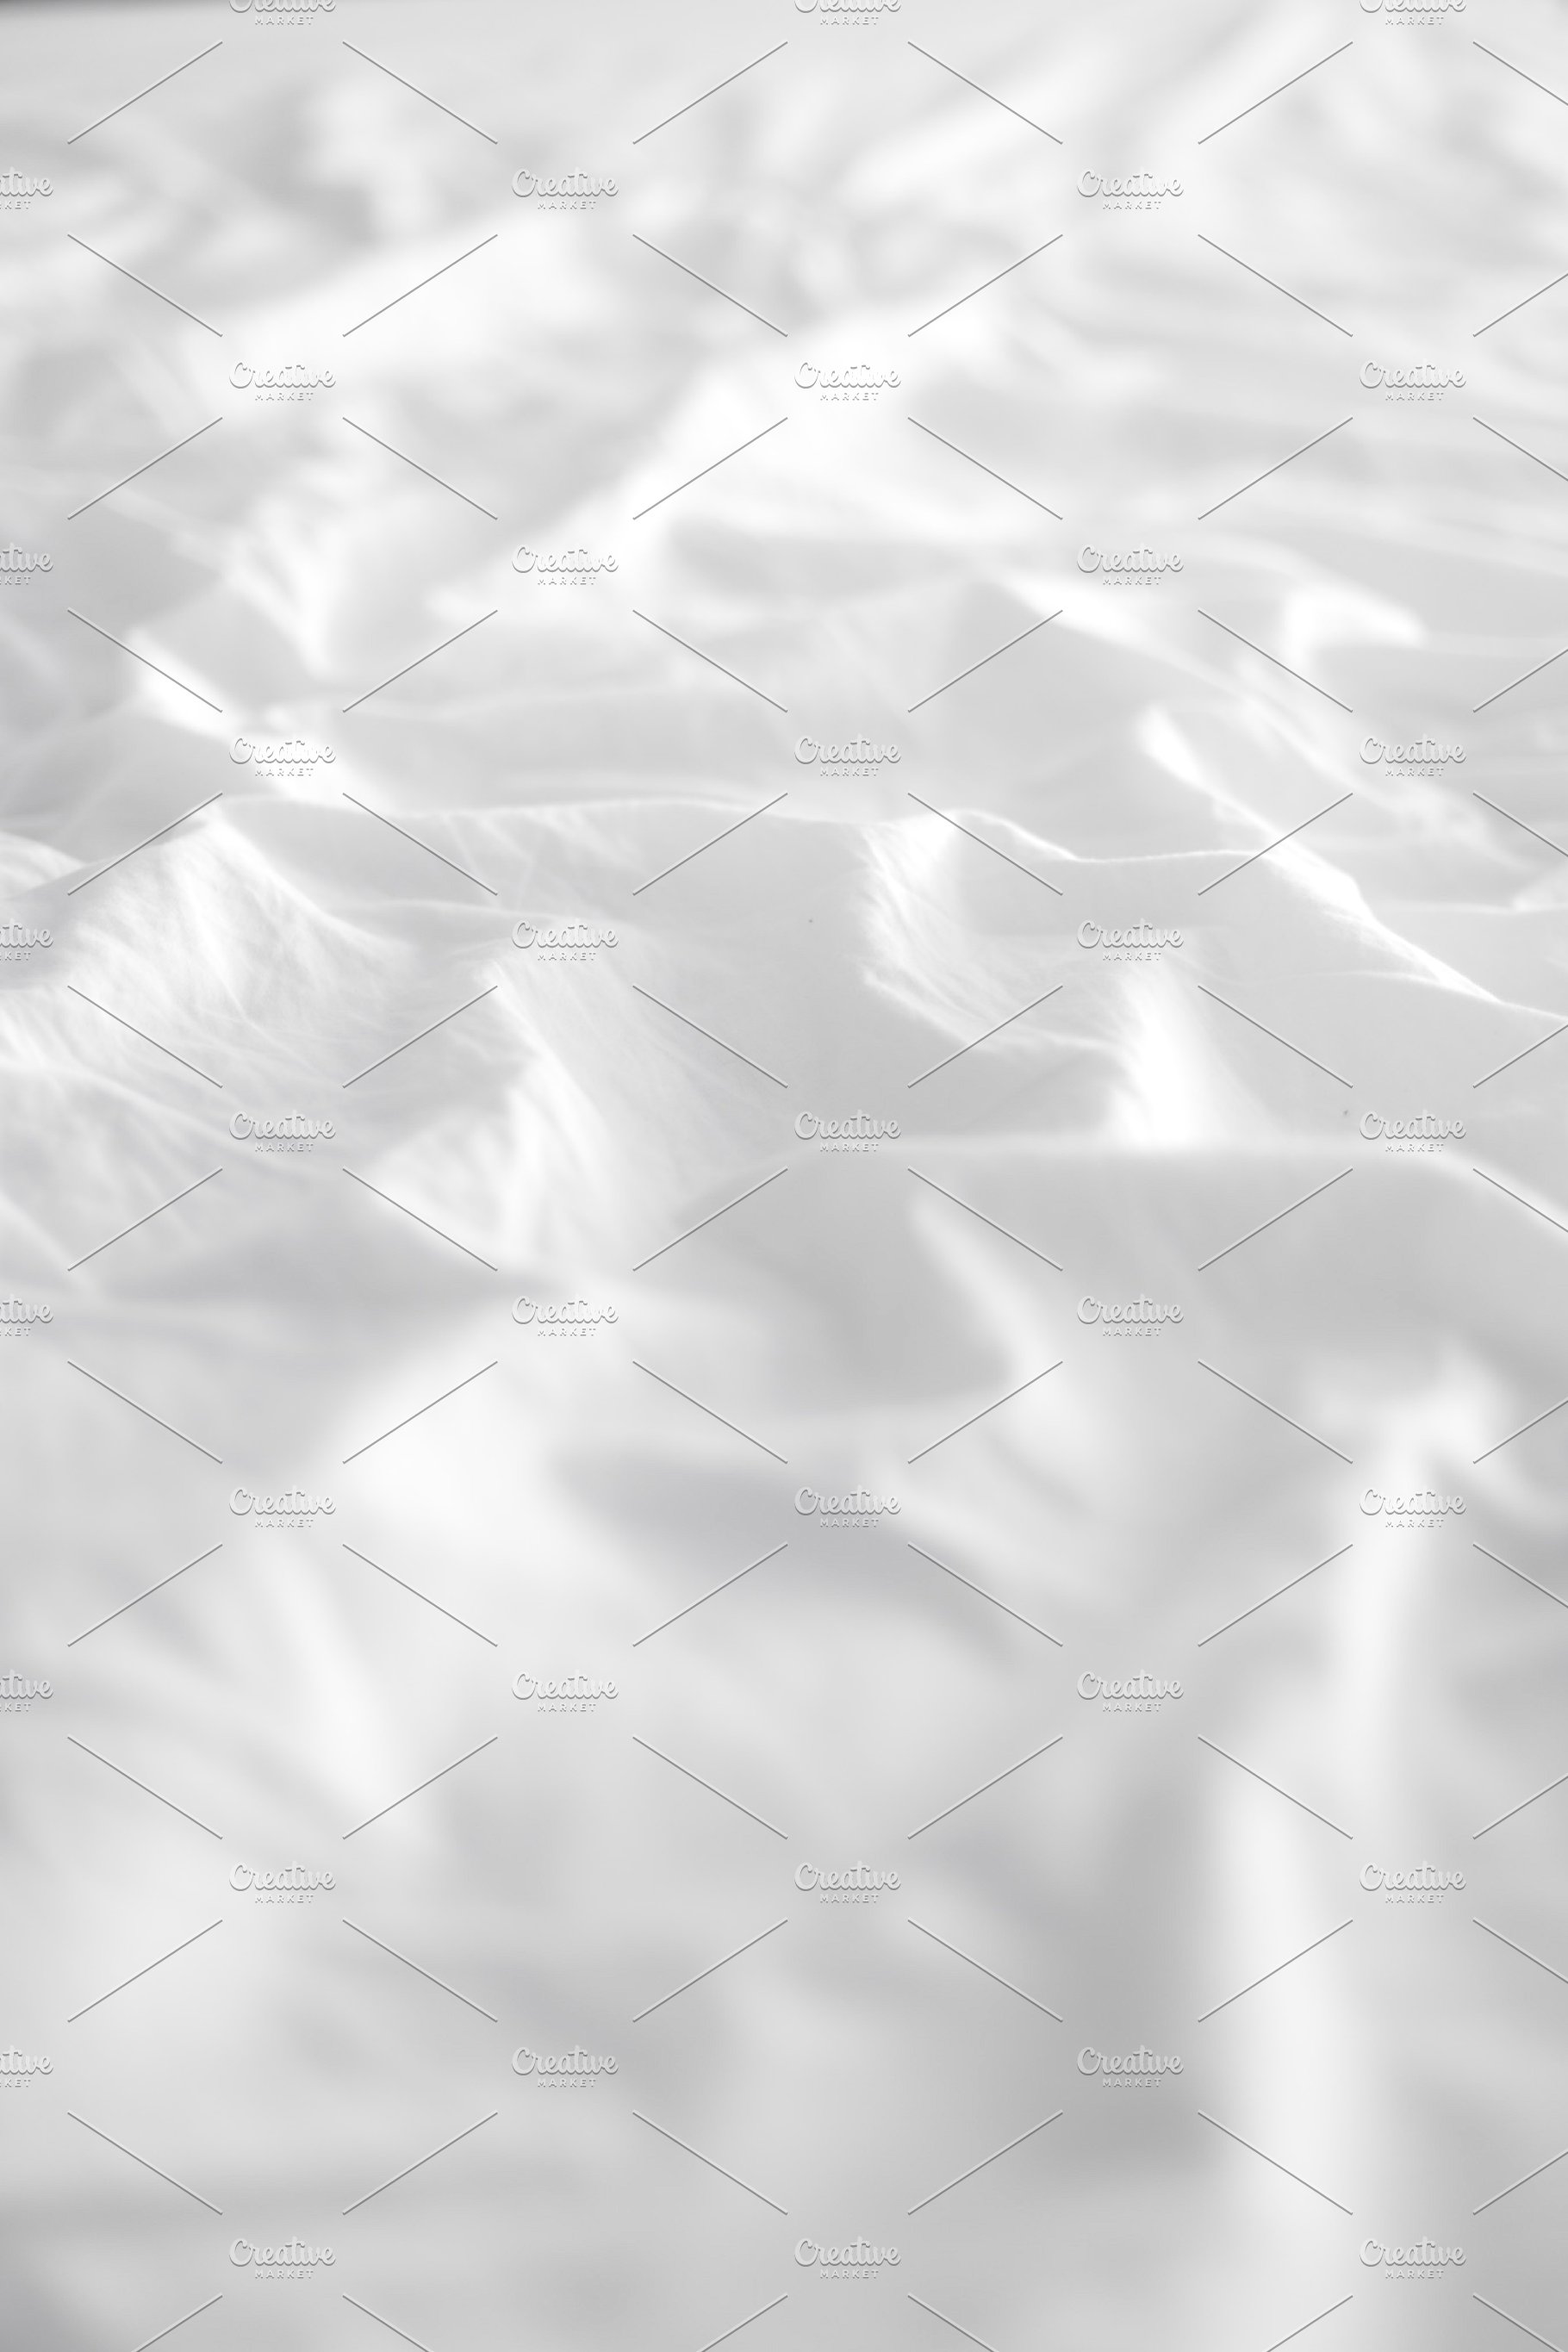 Unmade Bed Sheet Background High Quality Abstract Stock Photos